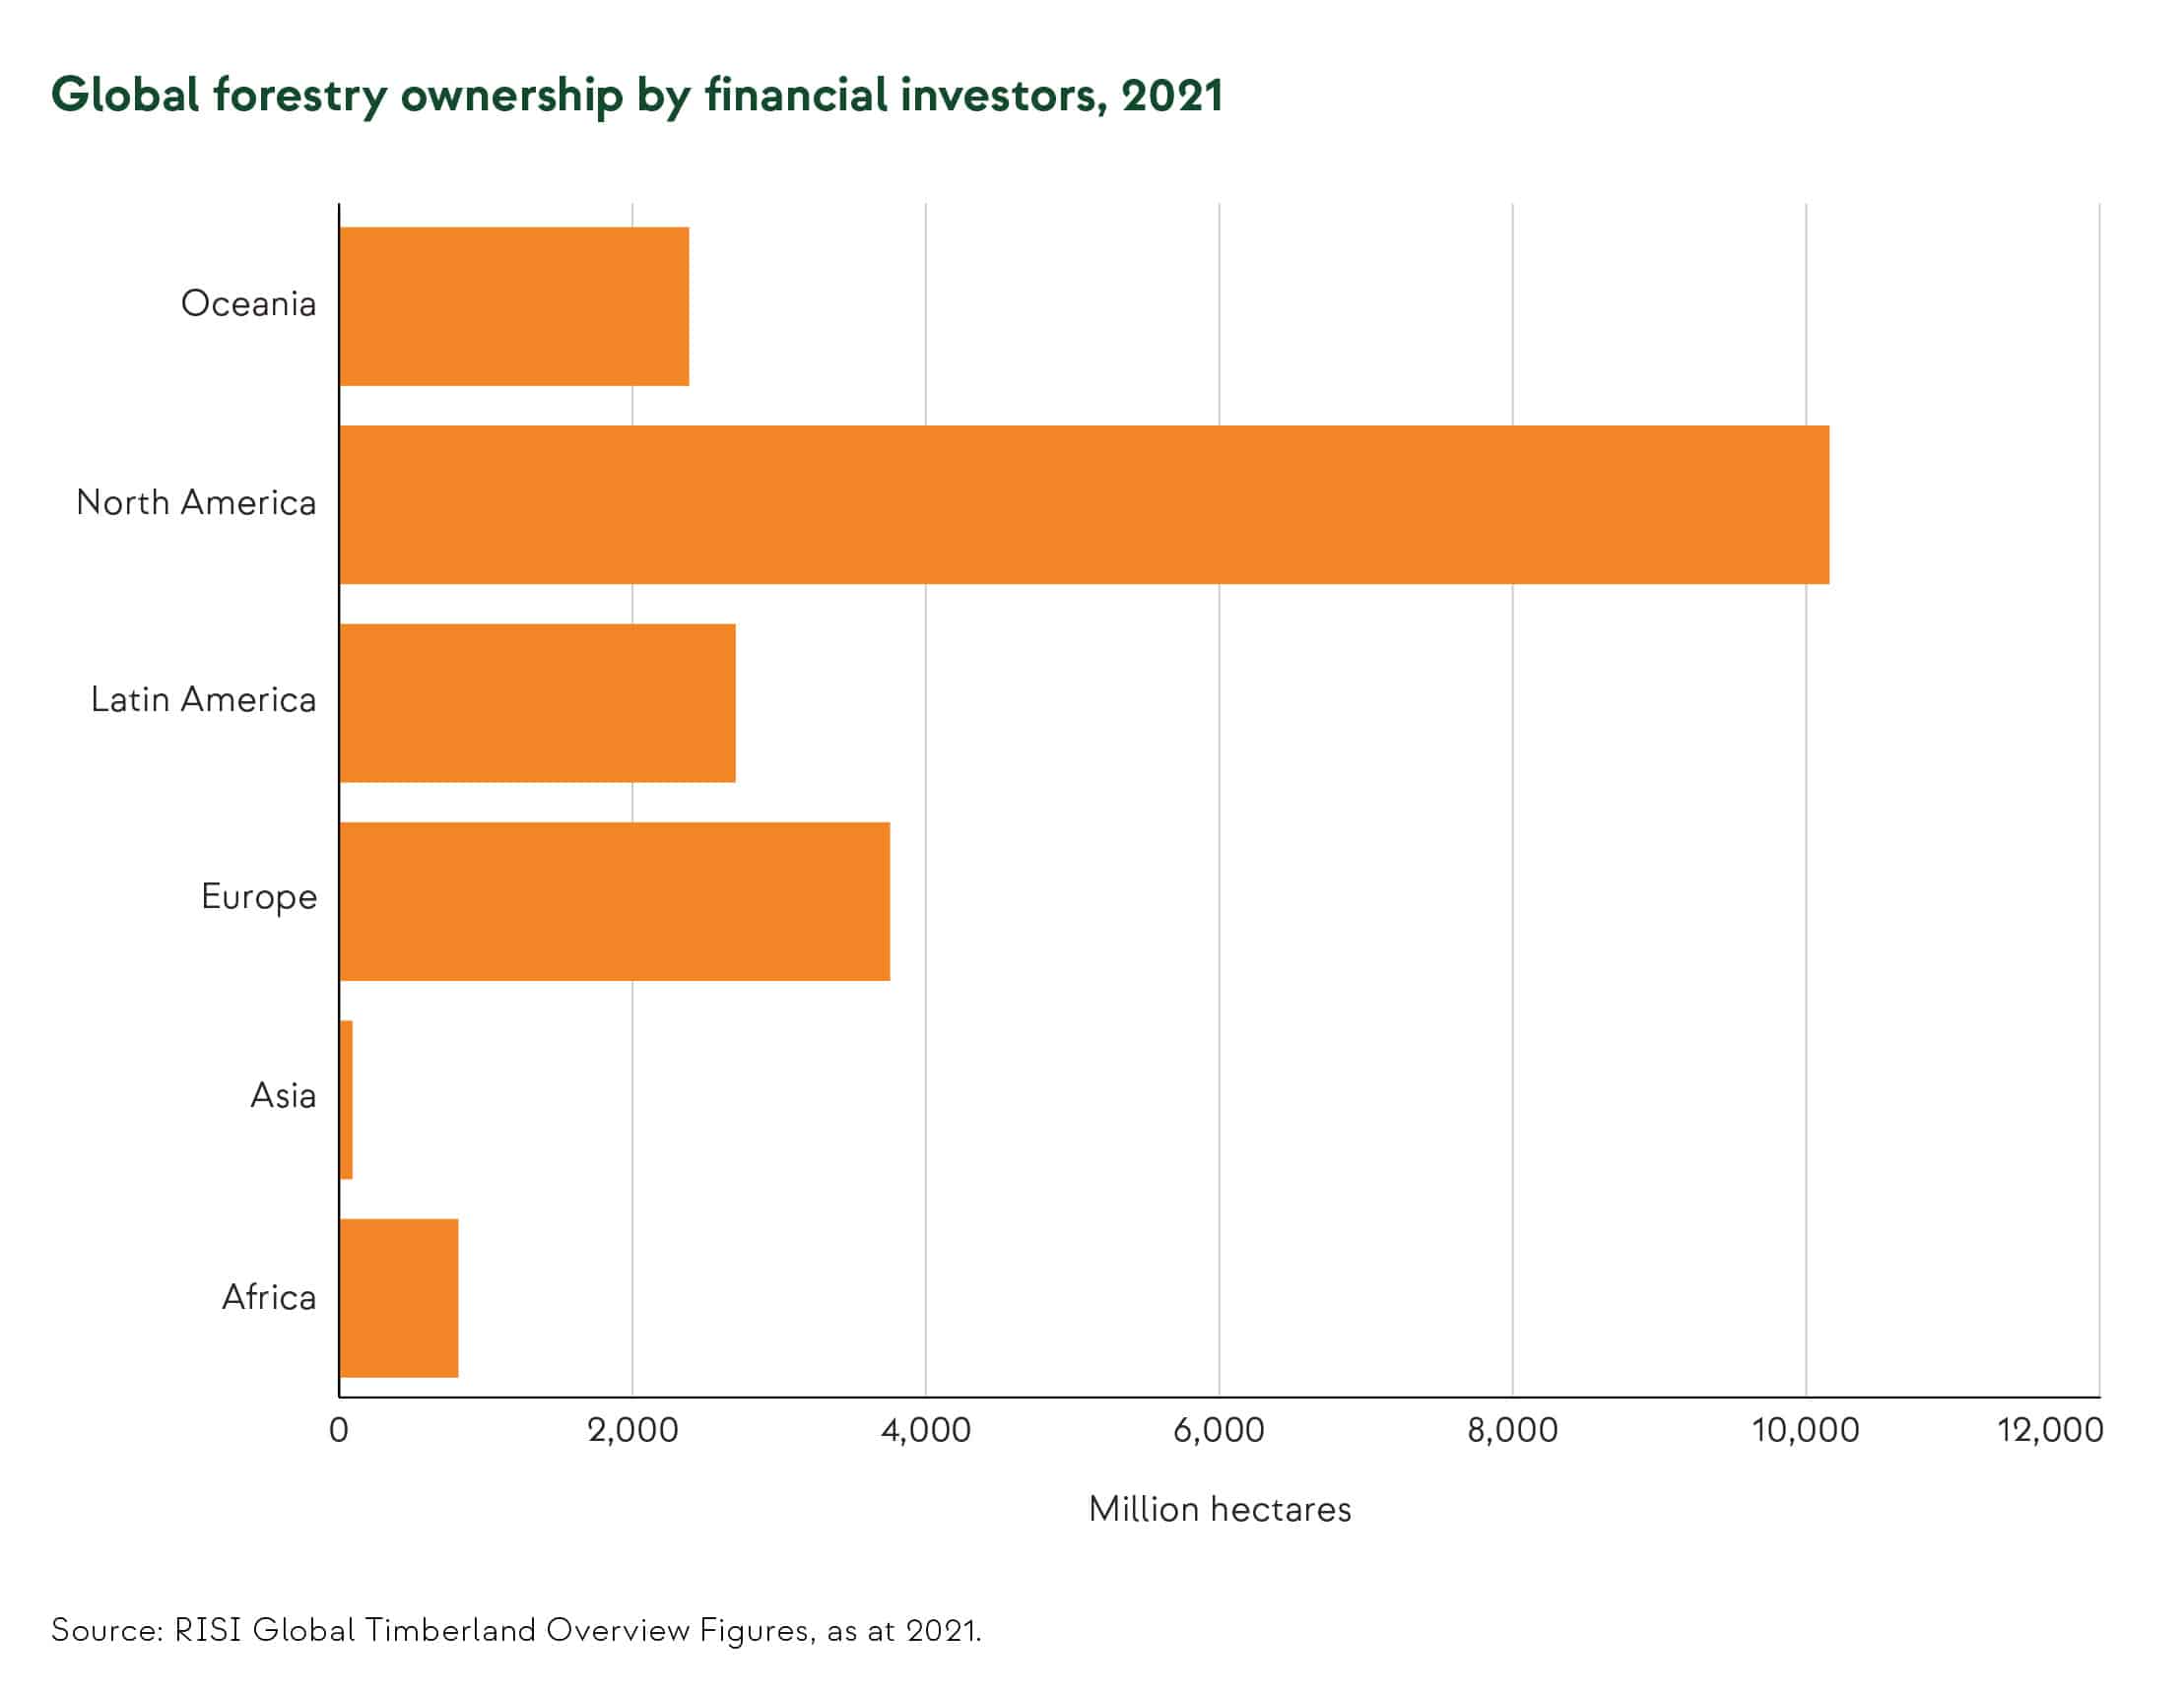 Global forestry ownership by financial investor 2021 graph